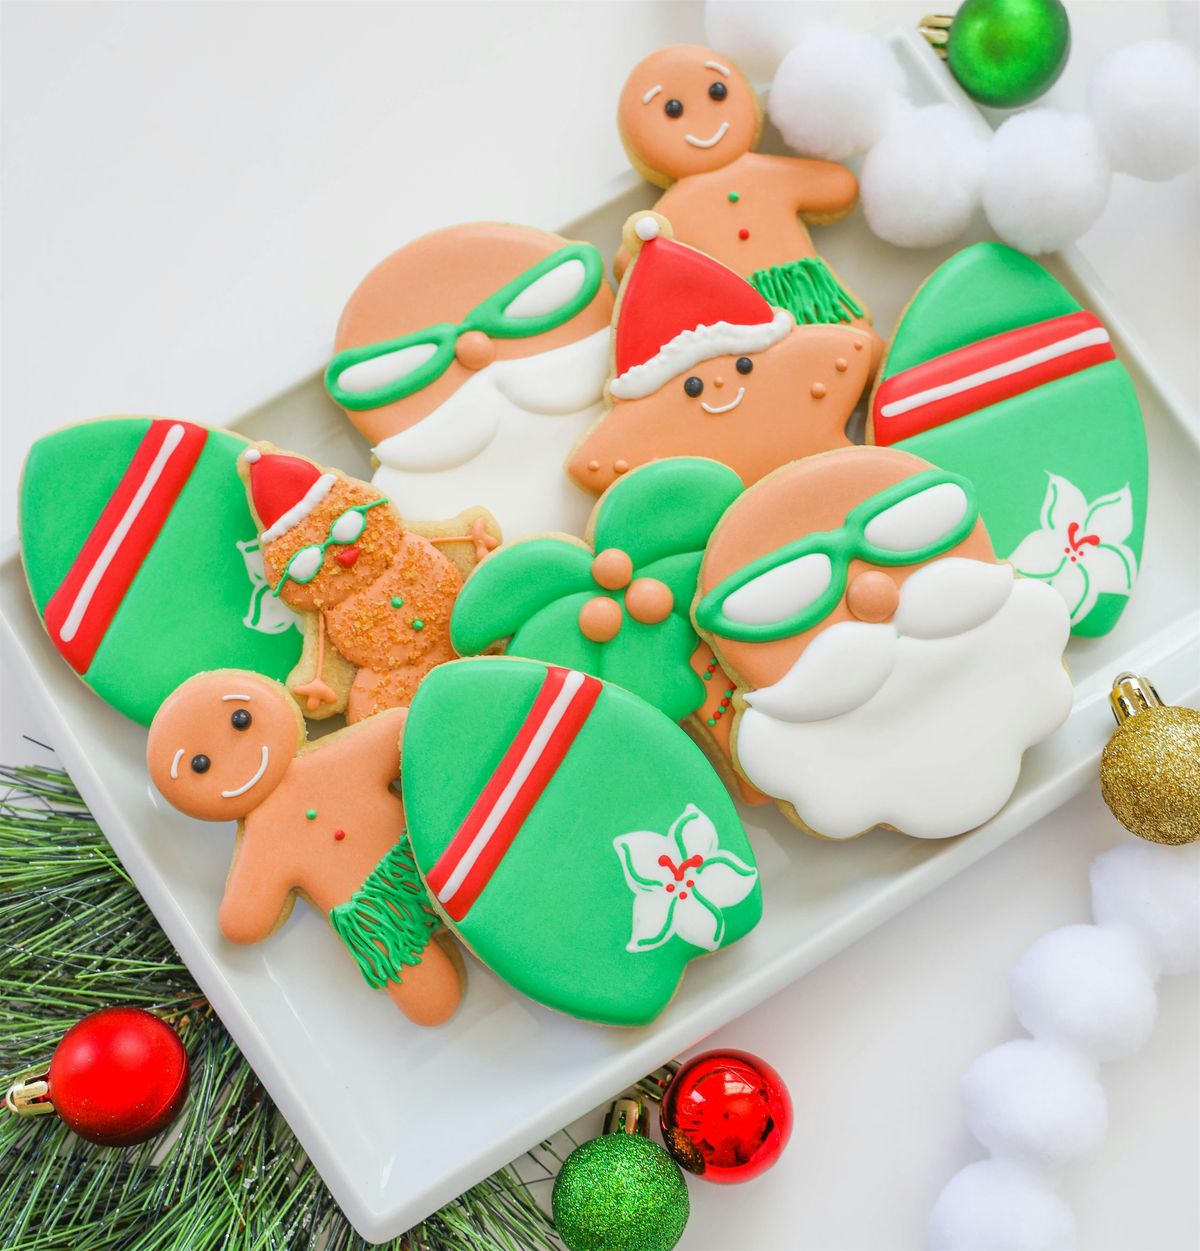 It\u2019s Christmas in July and we\u2019re rockin the Sugar Cookie Decorating Class!